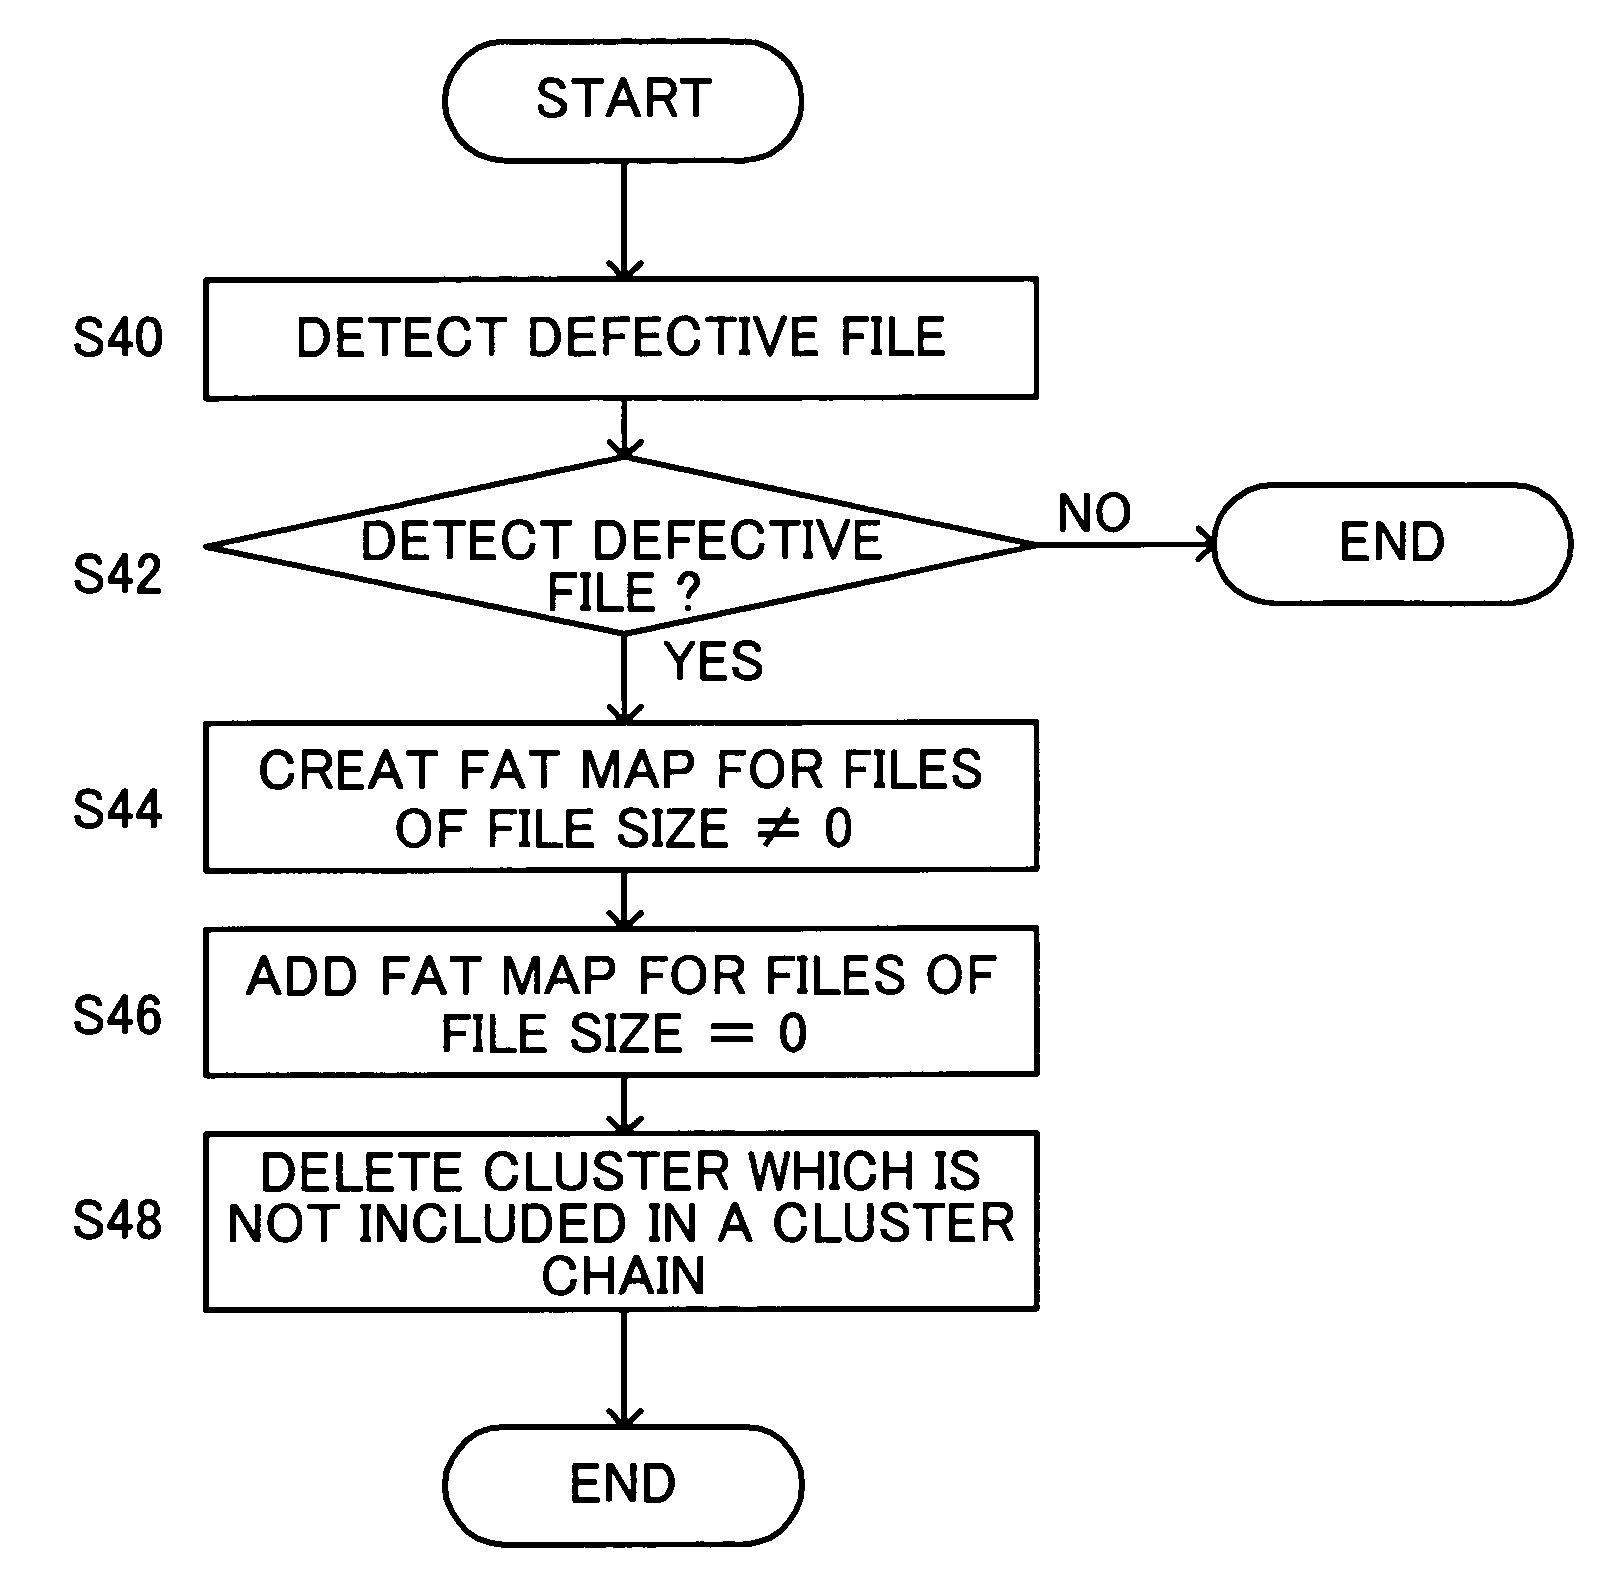 File system for enabling the restoration of a deffective file